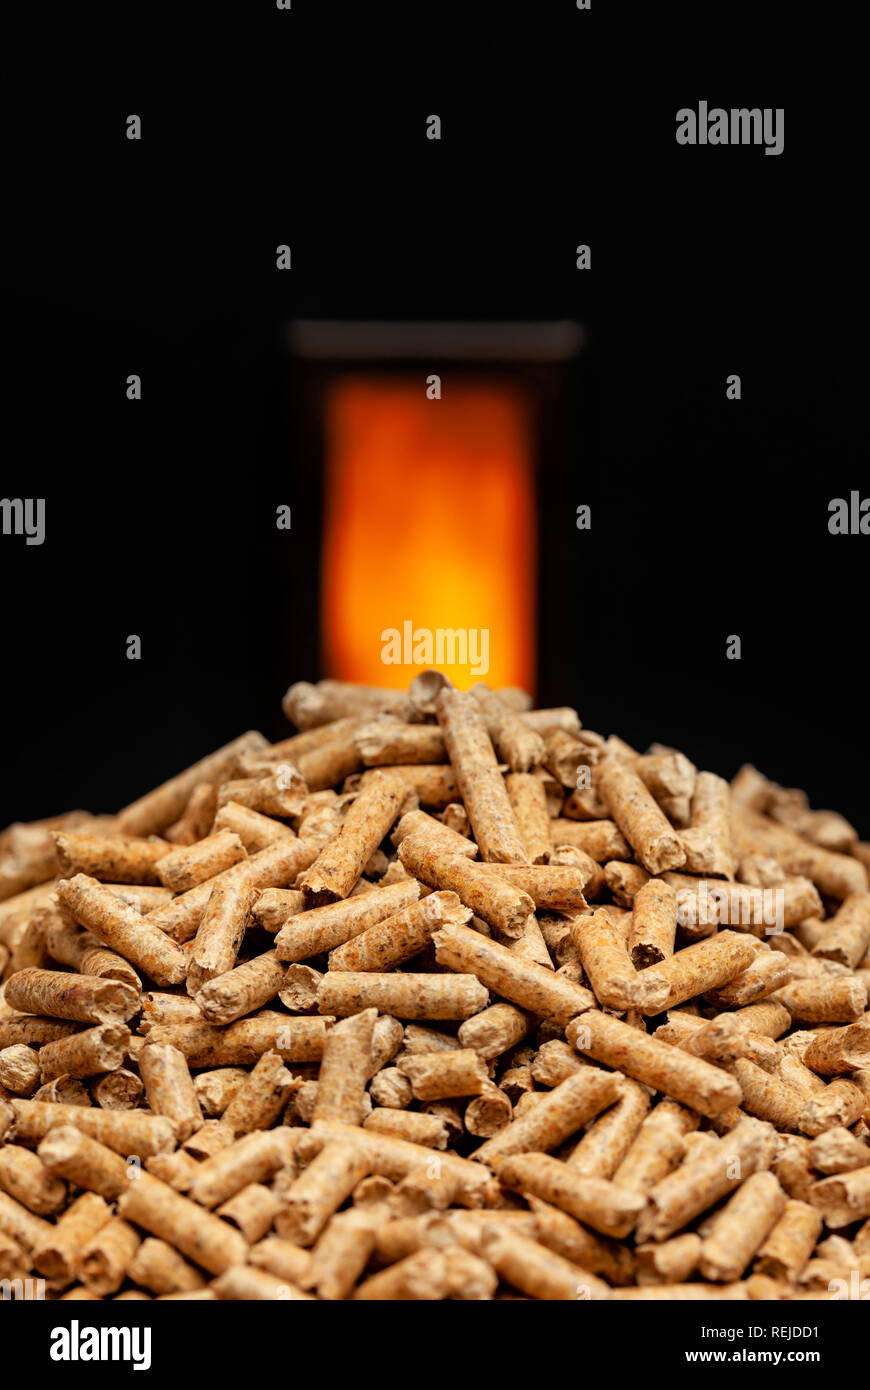 Wood pellets with combustion chamber in the background. Stock Photo